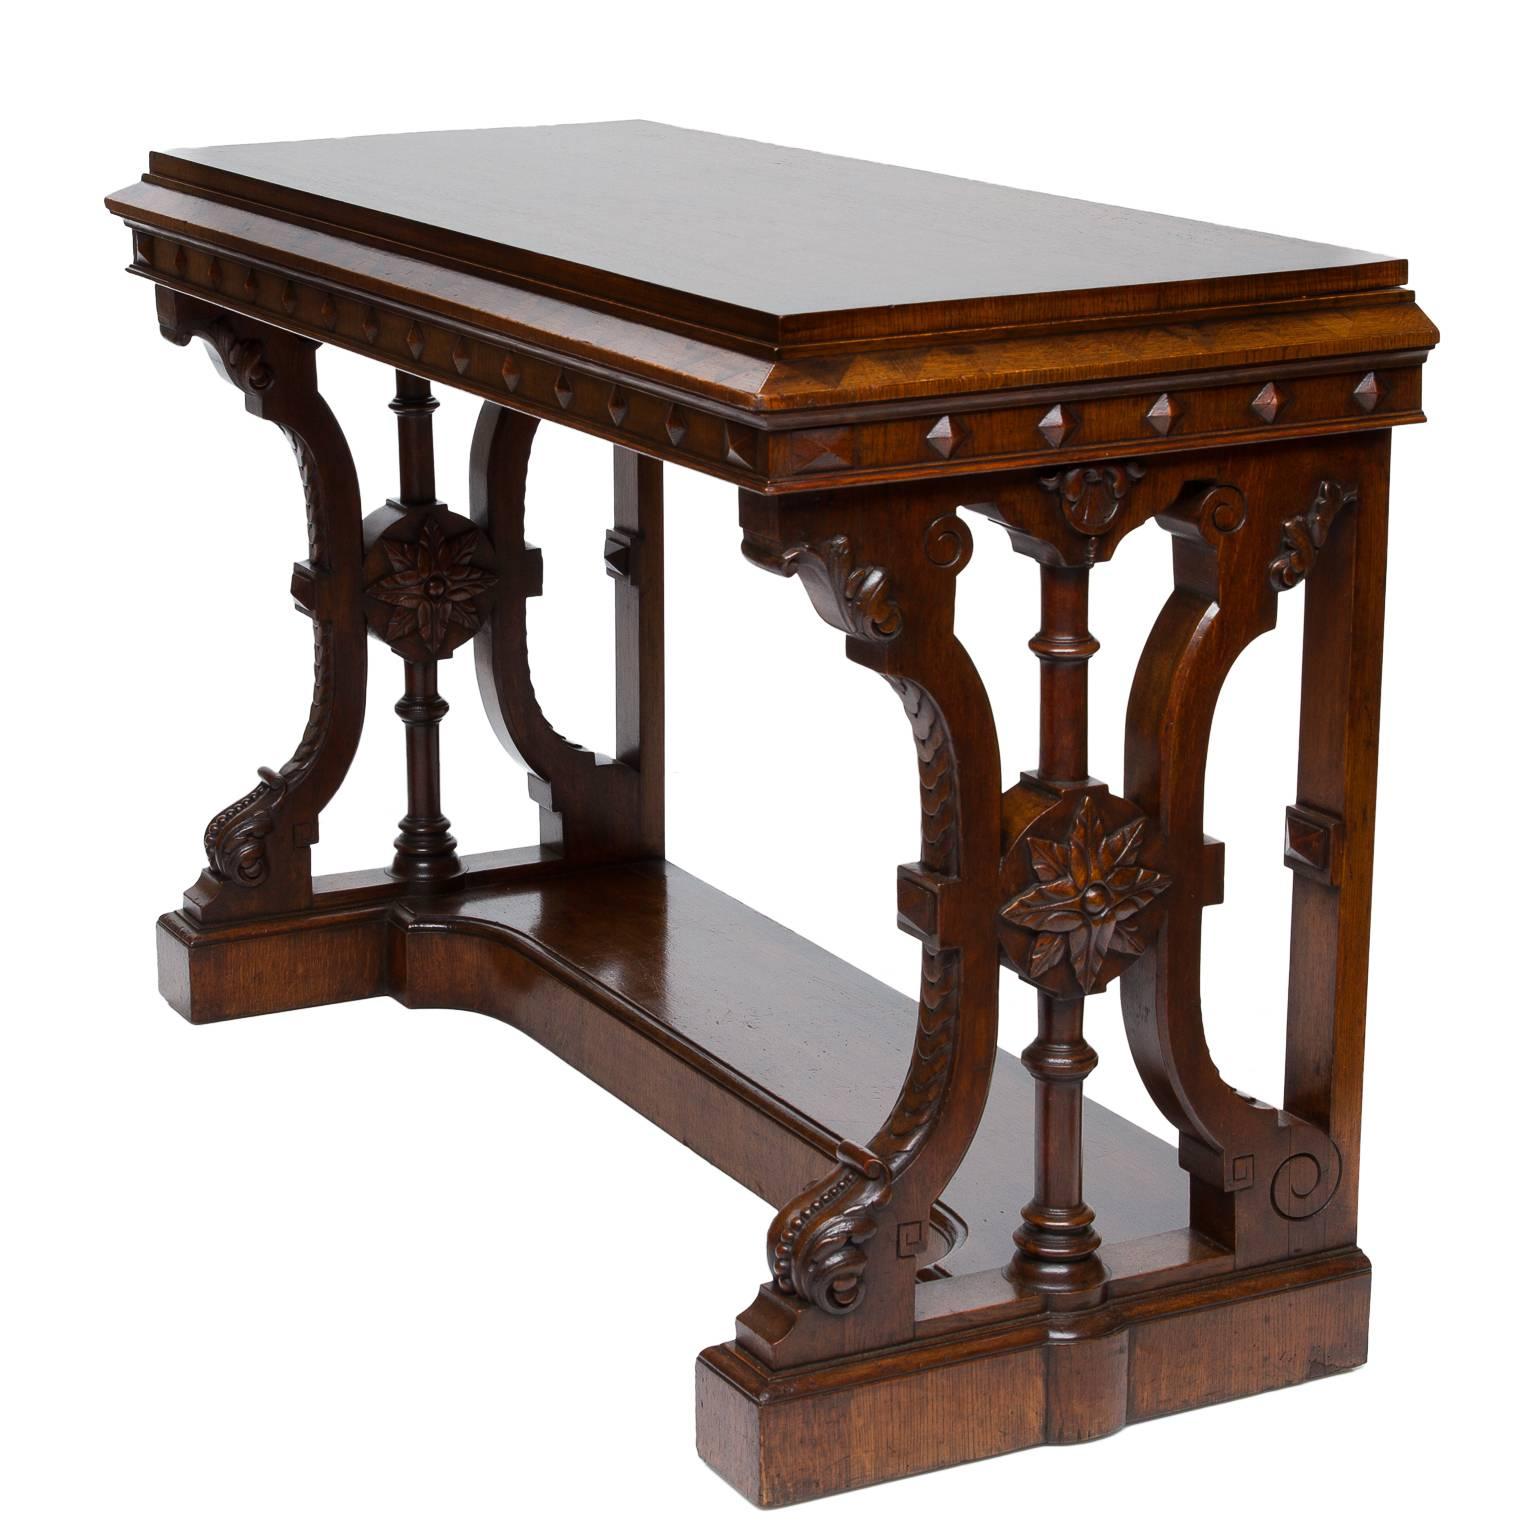 An extraordinary 19th century English inlaid console table. A geometrical parquetry inlaid top with contrasting inlay into thick oak veneer on mahogany wood. Sloped edge moulding front and sides with parquetry inlaid triangles. Under the moulding,